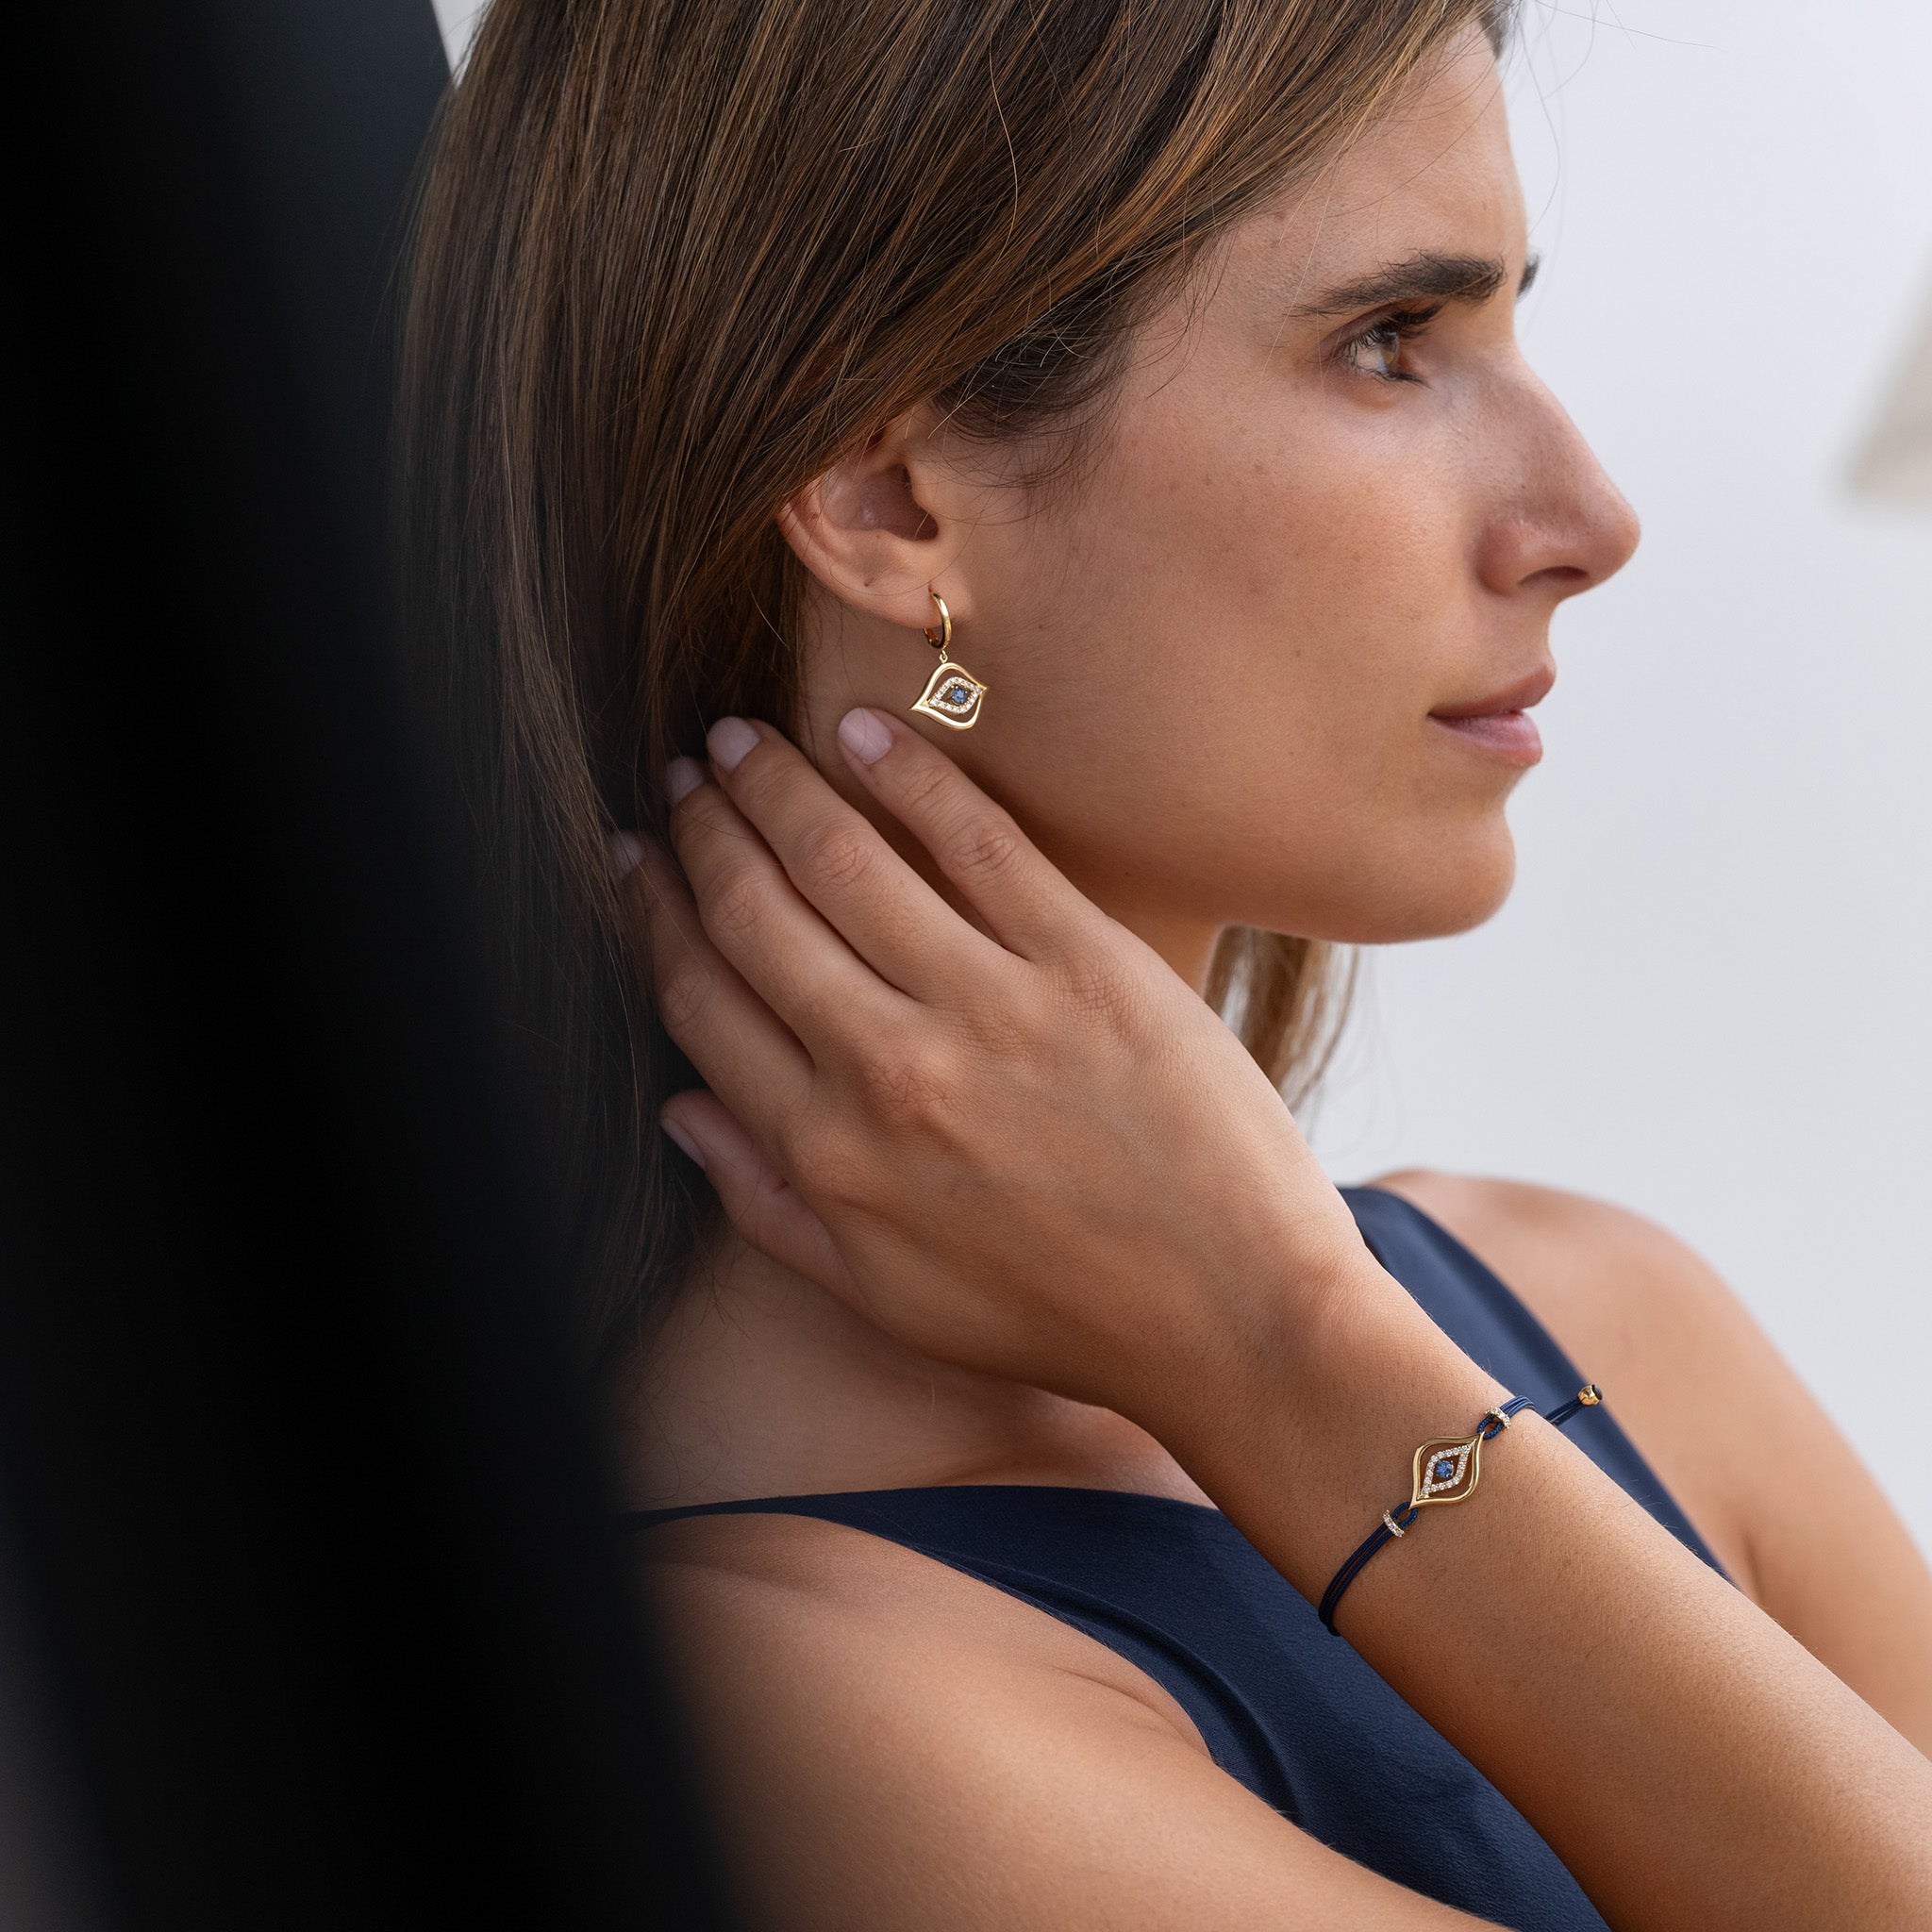 Exquisite fine jewellery featuring stunning diamond and sapphire earrings and evil eye bracelet on model.